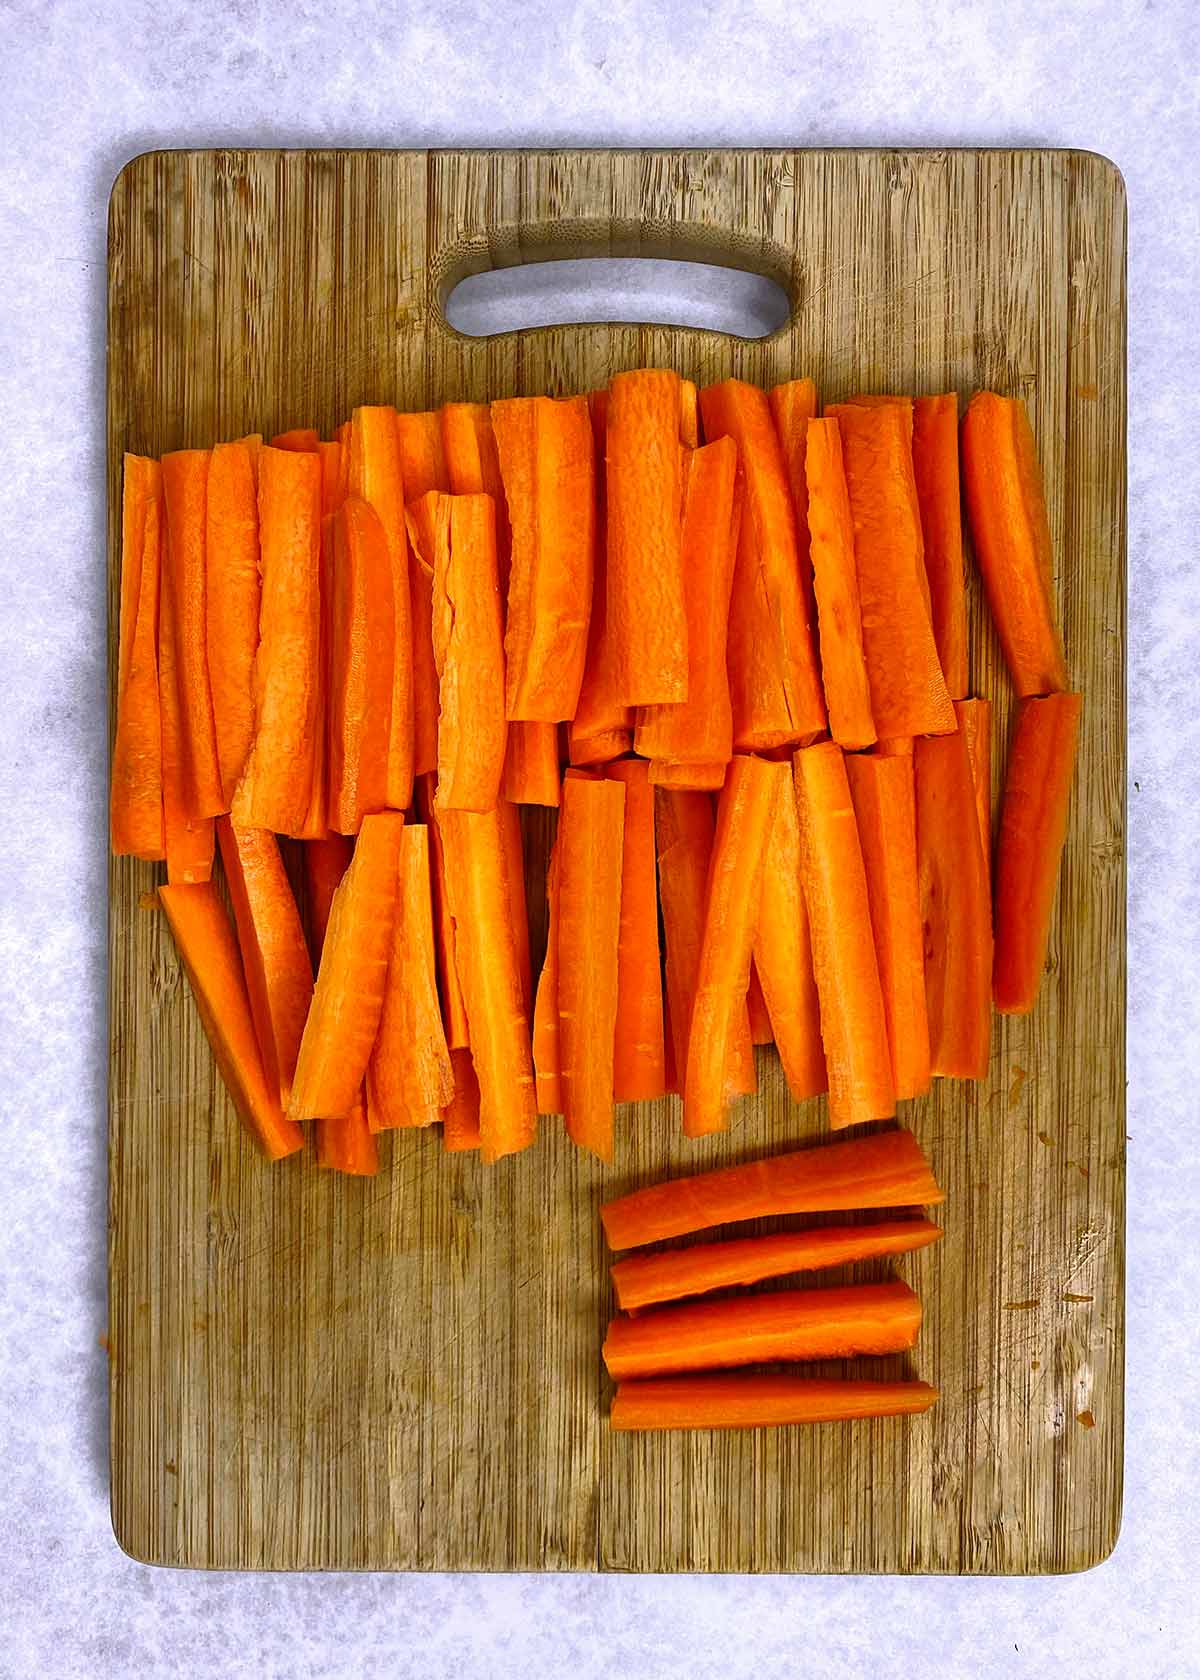 A wooden chopping board with carrots cut into battens.